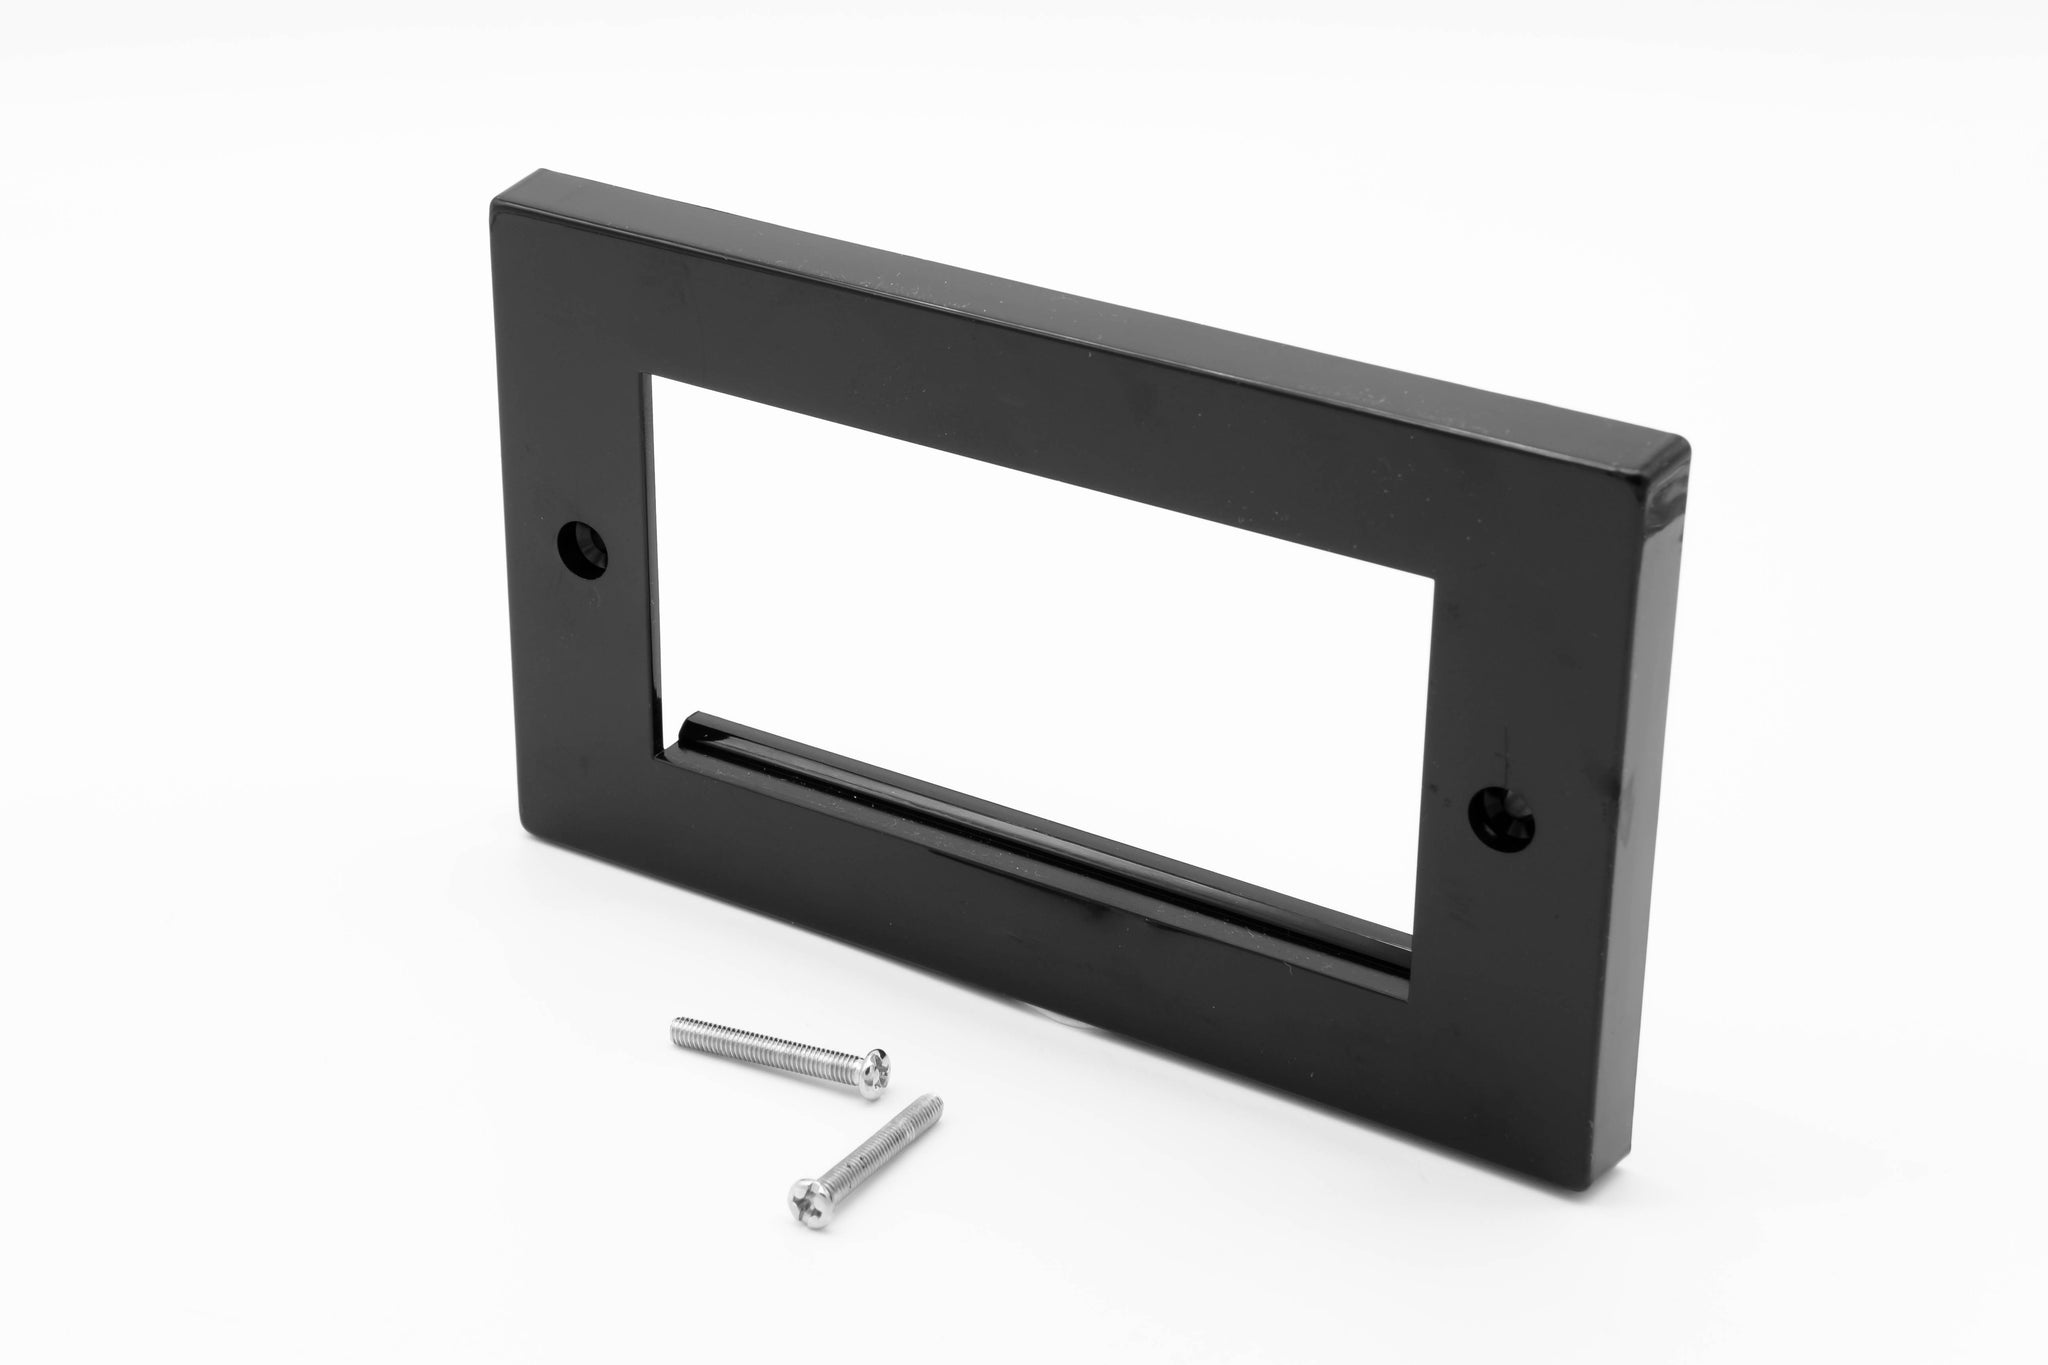 Low Profile Double Gang (4 Slot) Faceplate for 4 x Euro Modules -  Black (LP-DOUBLE-T-N-BLK)